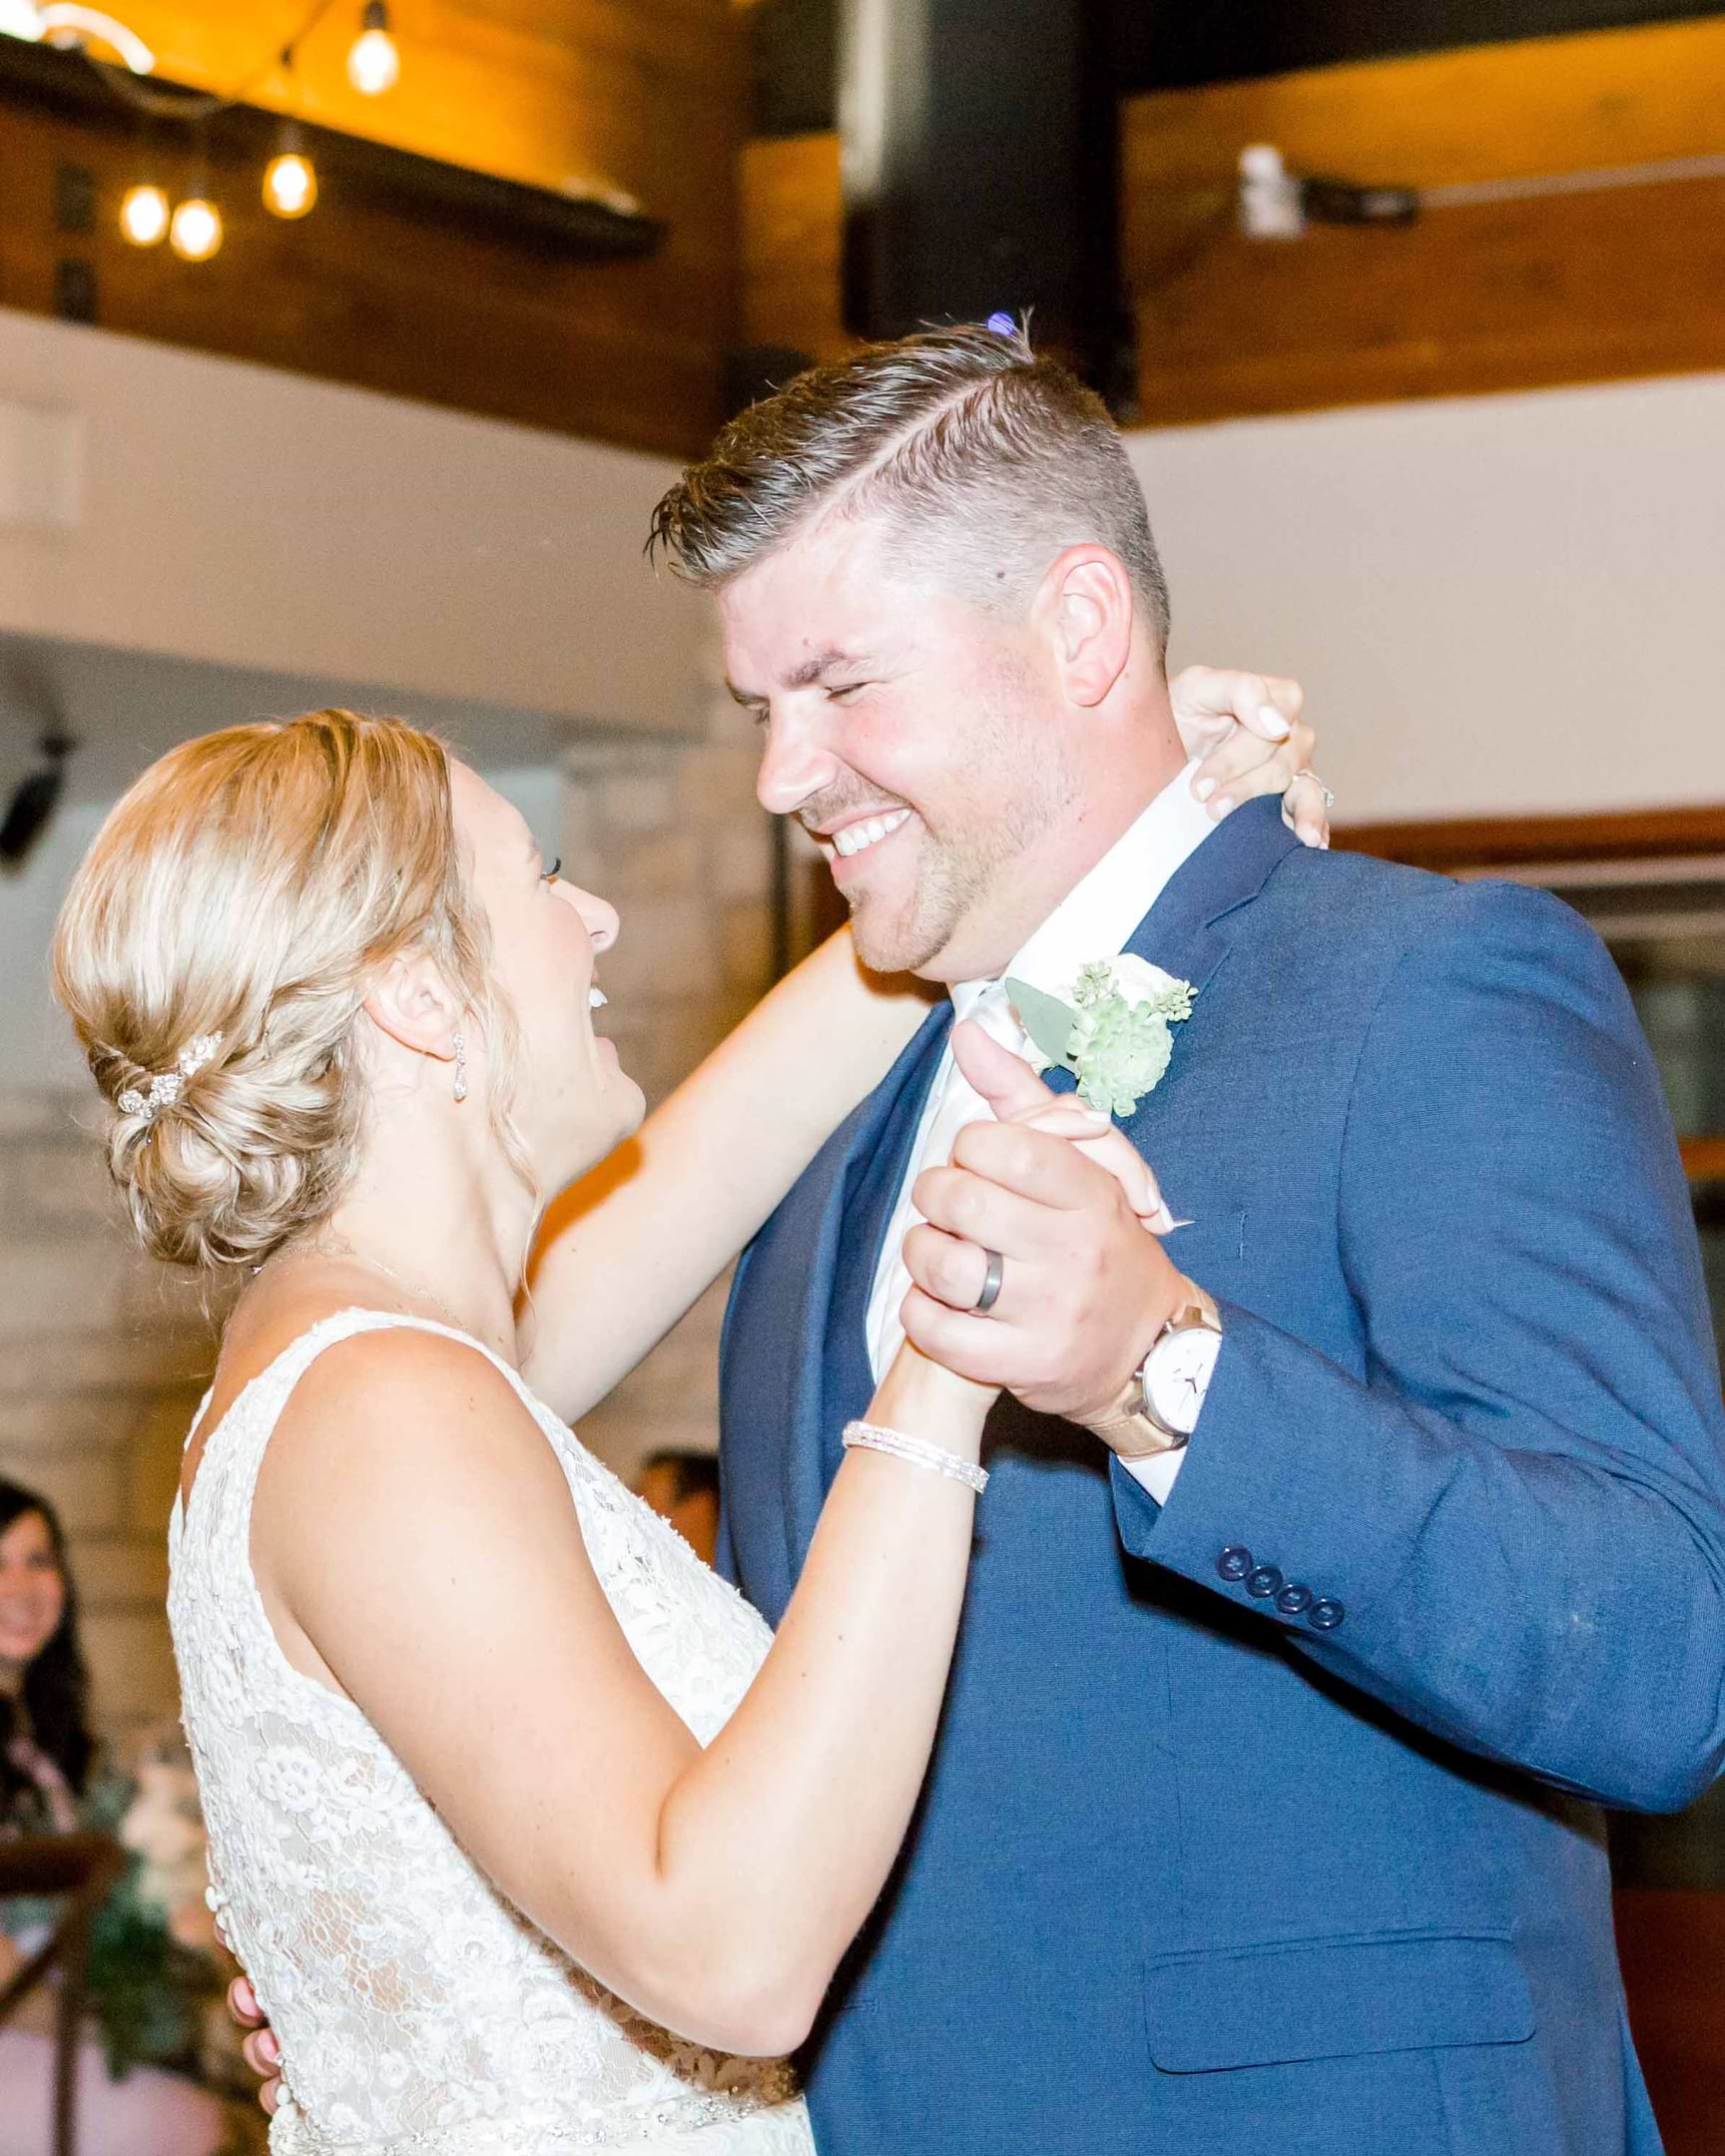 The Happy Couple Shares A Sweet First Dance In The Glowing Ballroom